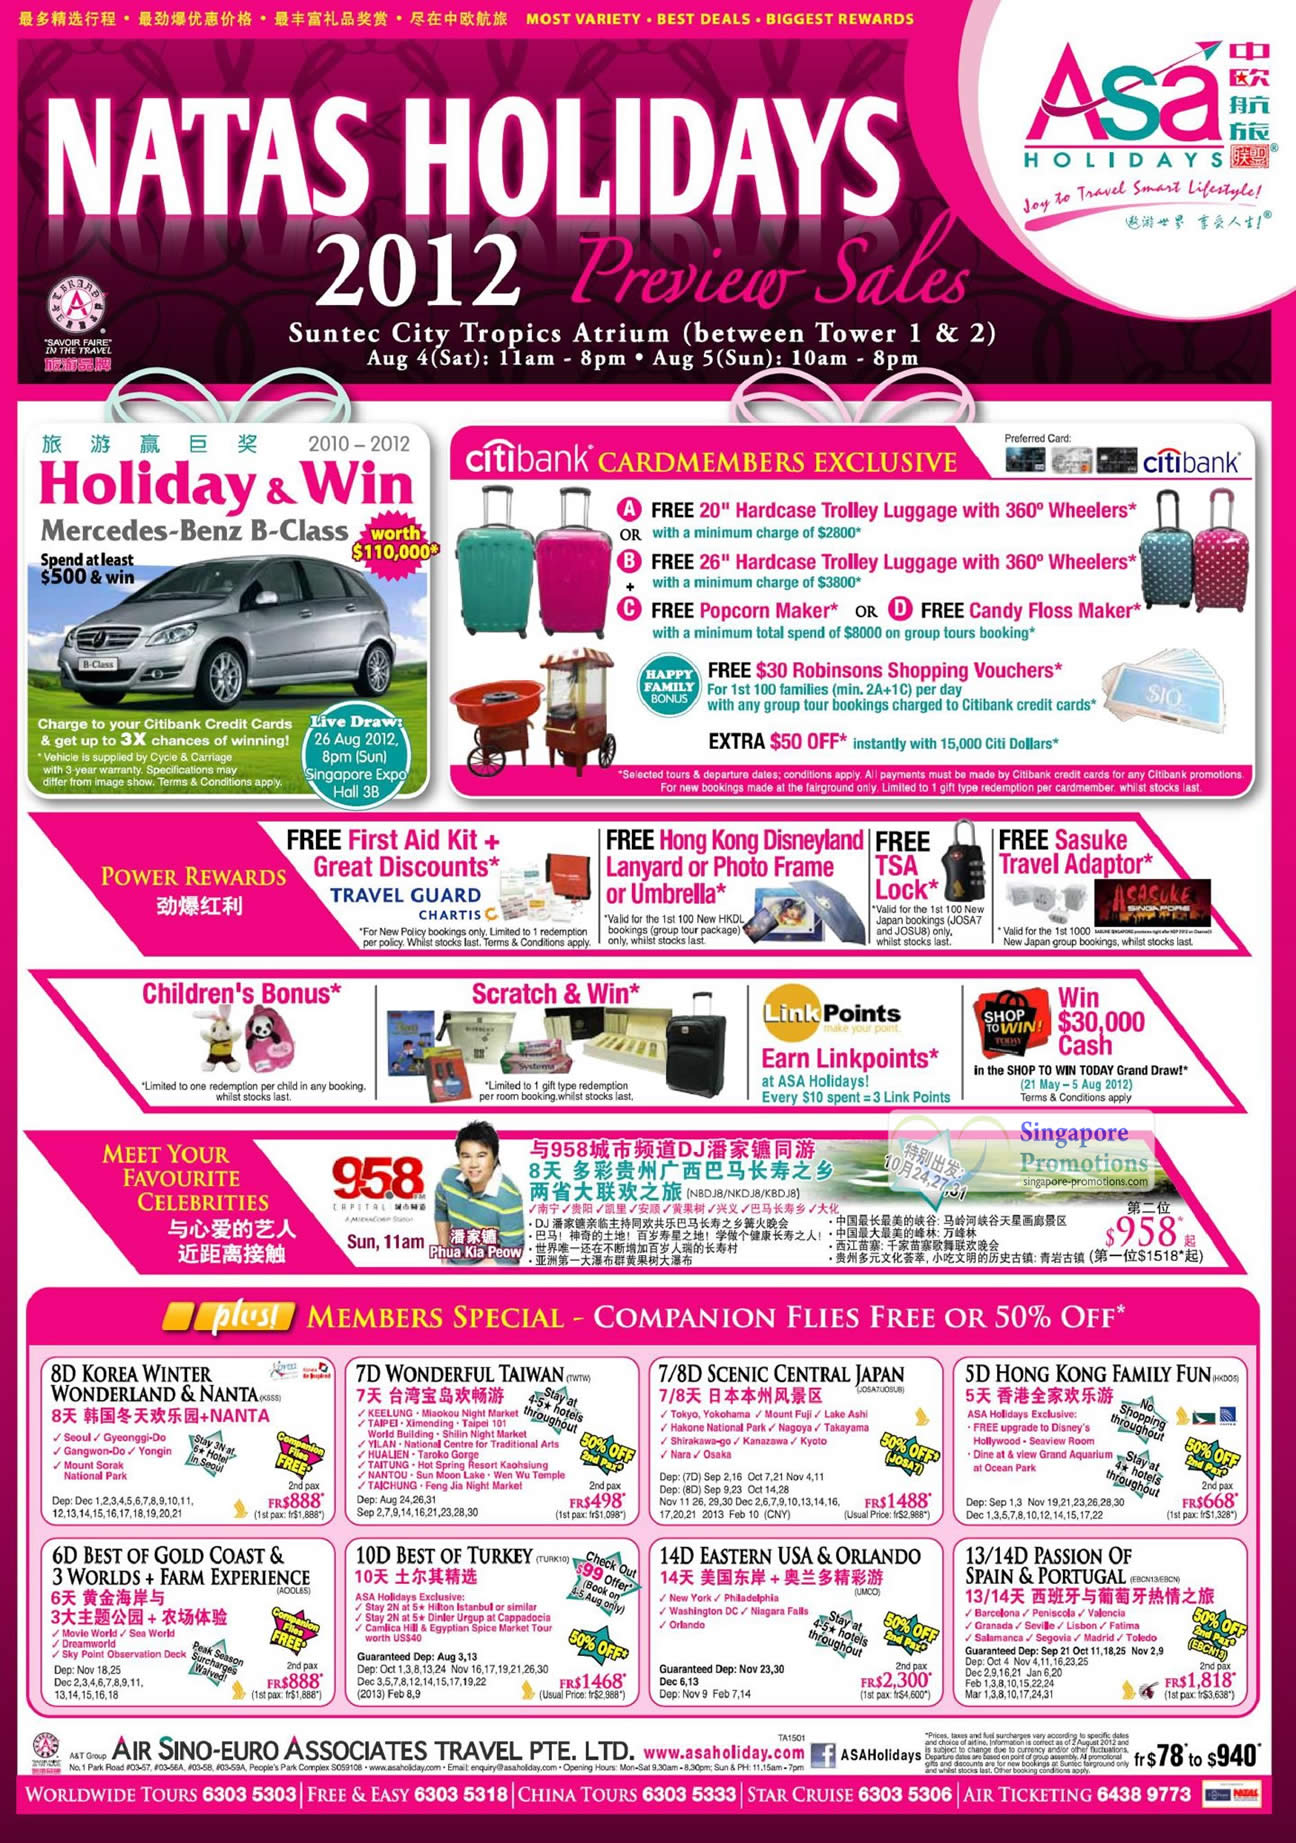 Featured image for ASA Holidays NATAS 2012 Preview Sale @ Suntec City 4 - 5 Aug 2012